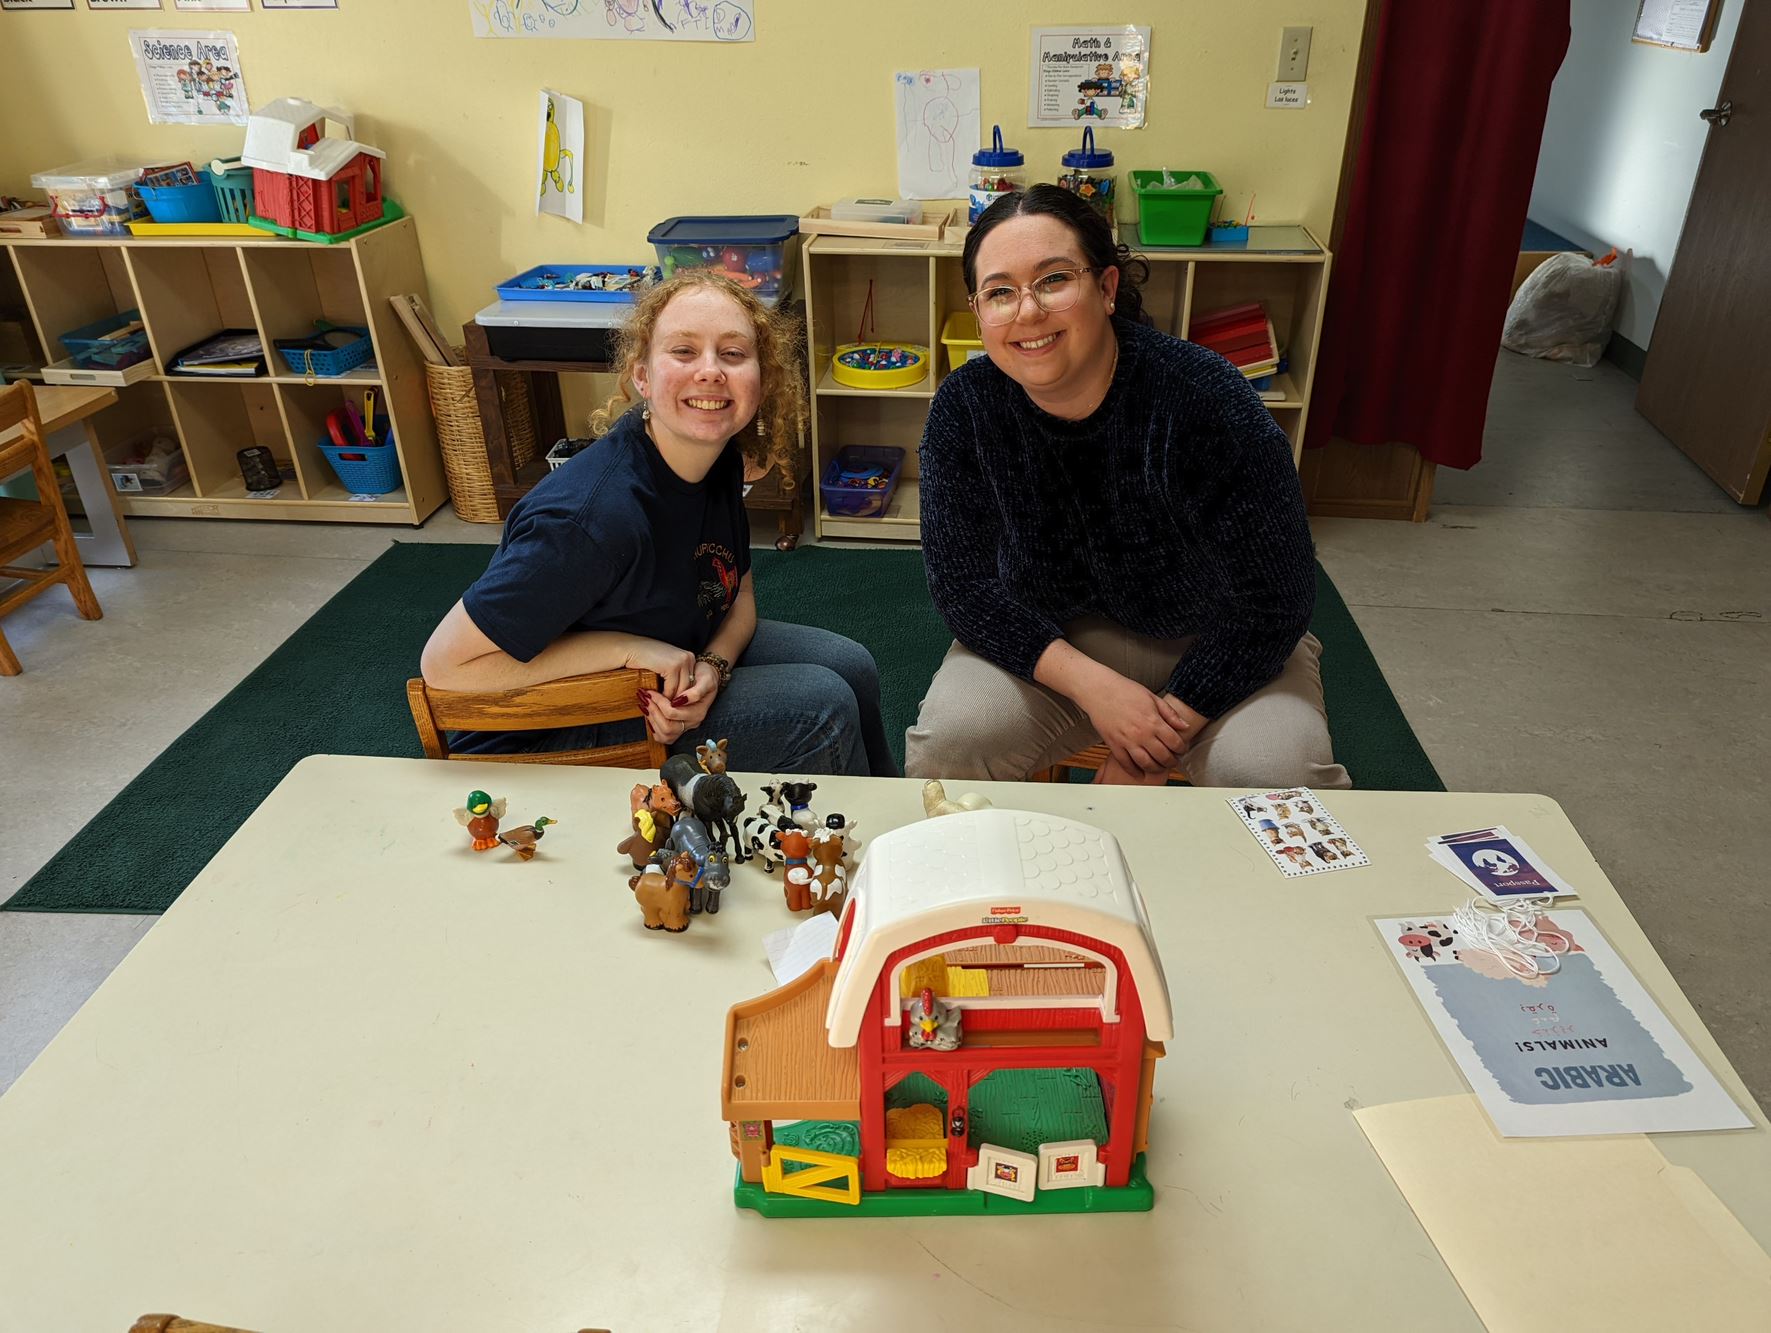 Emily Hartman (right) works at Neighborhood Centers of Johnson County